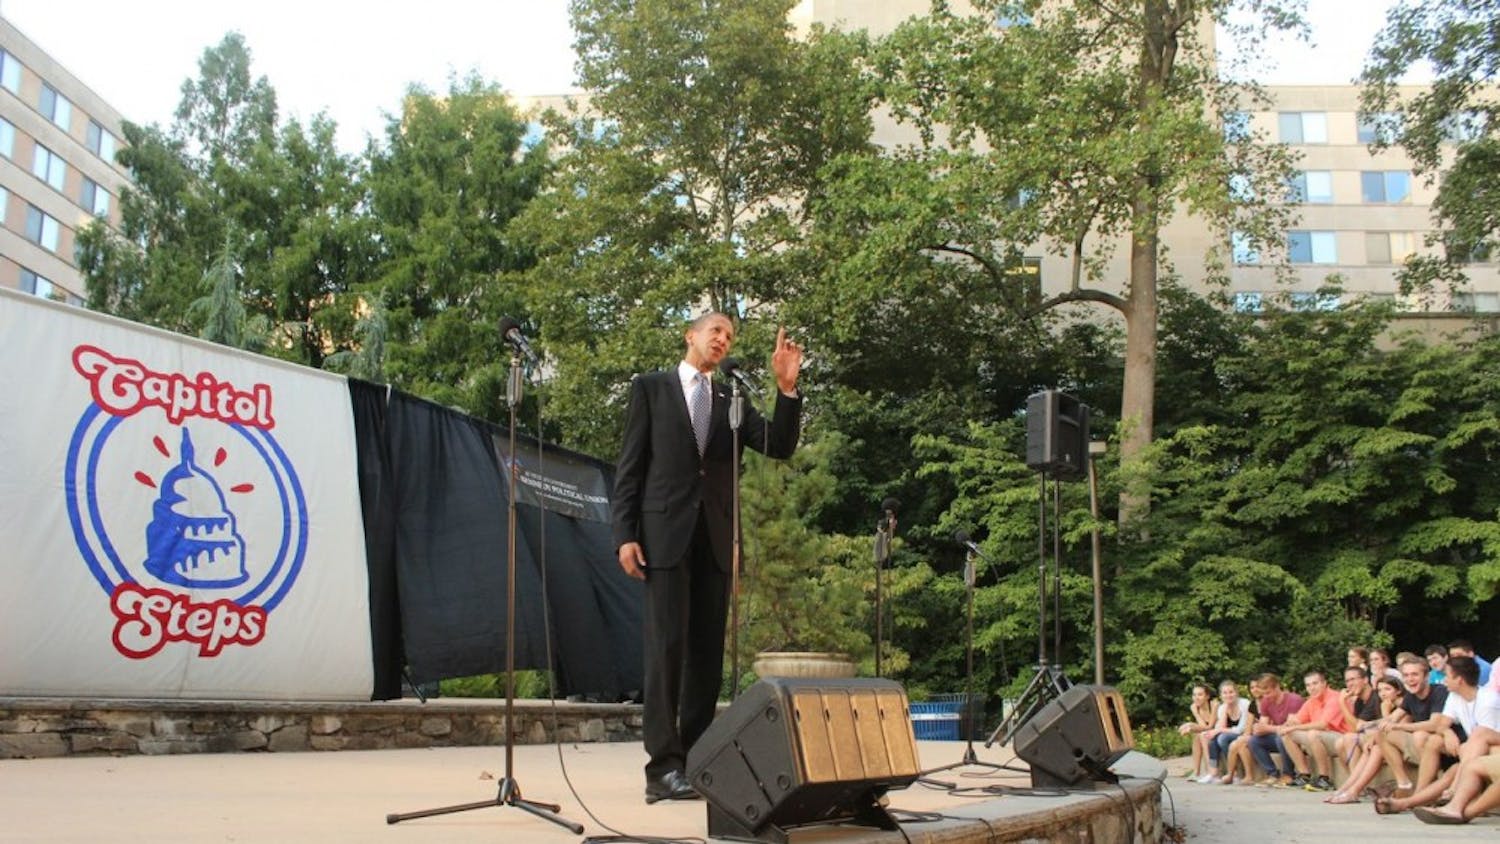 	A Barack Obama impressionist sings a parody of “Under the Sea,” detailing the capture of Osama bin Laden at the Capitol Steps performance on Aug. 25.